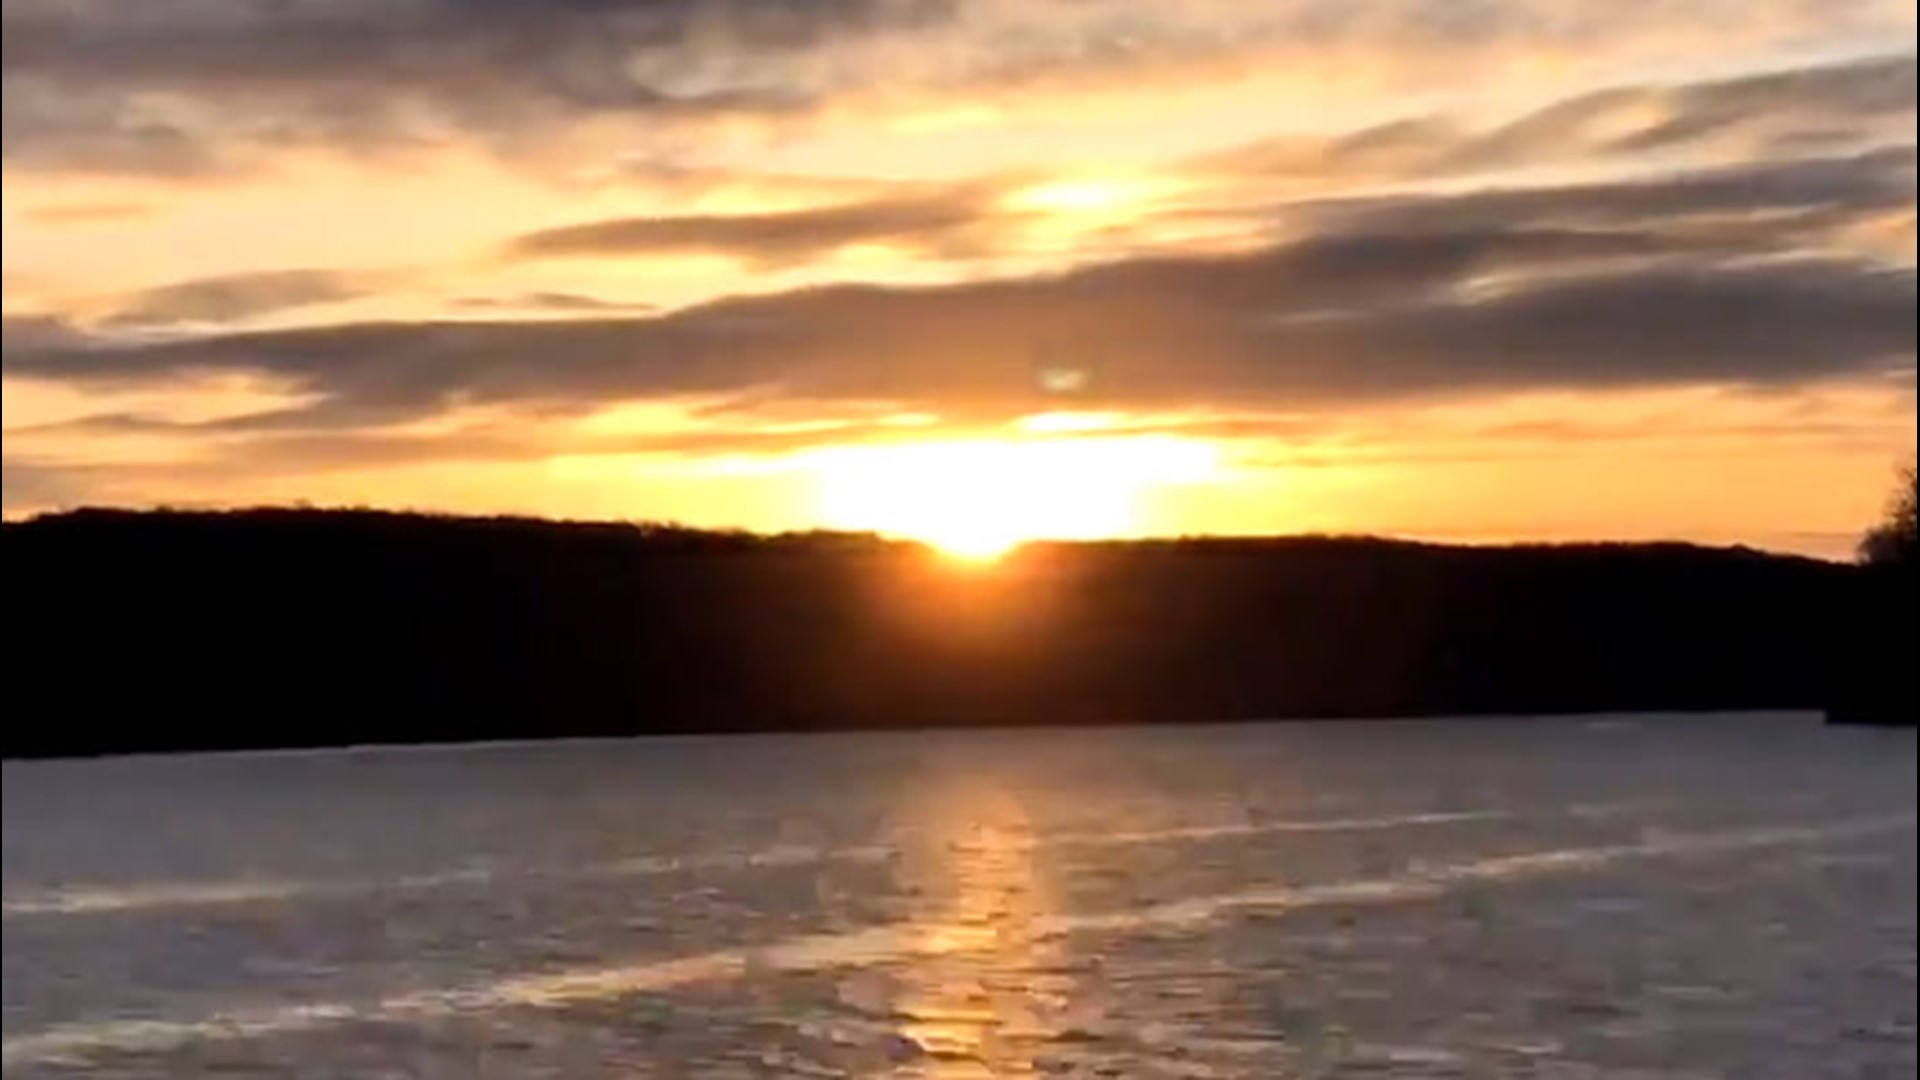 Excited about Friday and the weekend? Treat yourself to this stunning sunrise captured in a time-lapse video over the river in Higganum, Connecticut, on March 5.